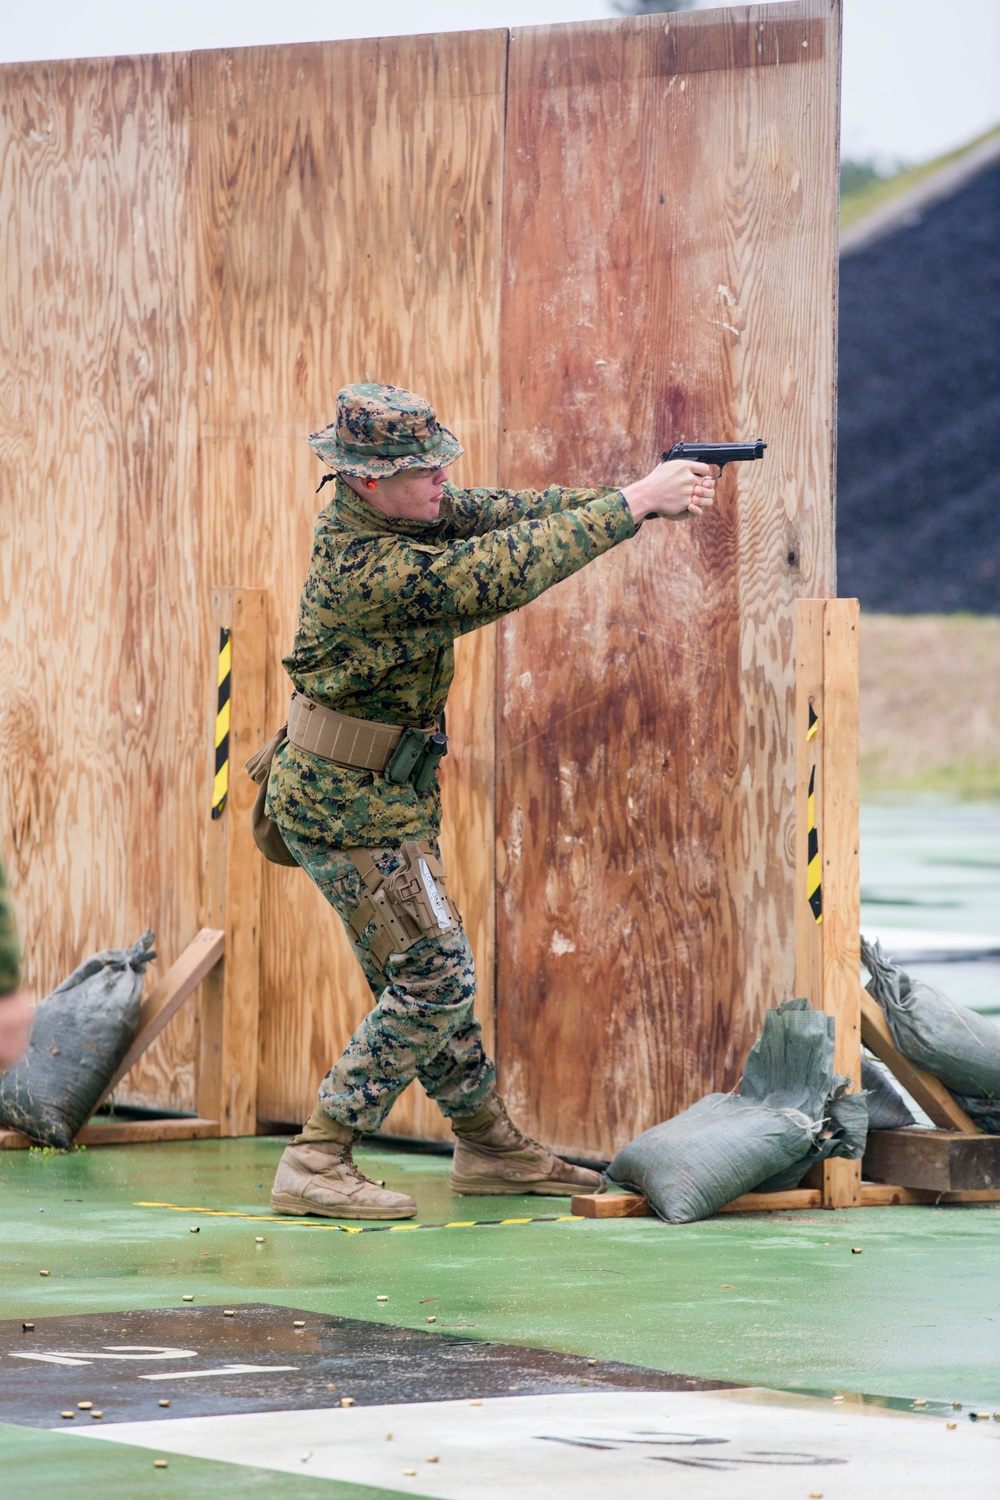 Annual Far East Marksmanship Competition